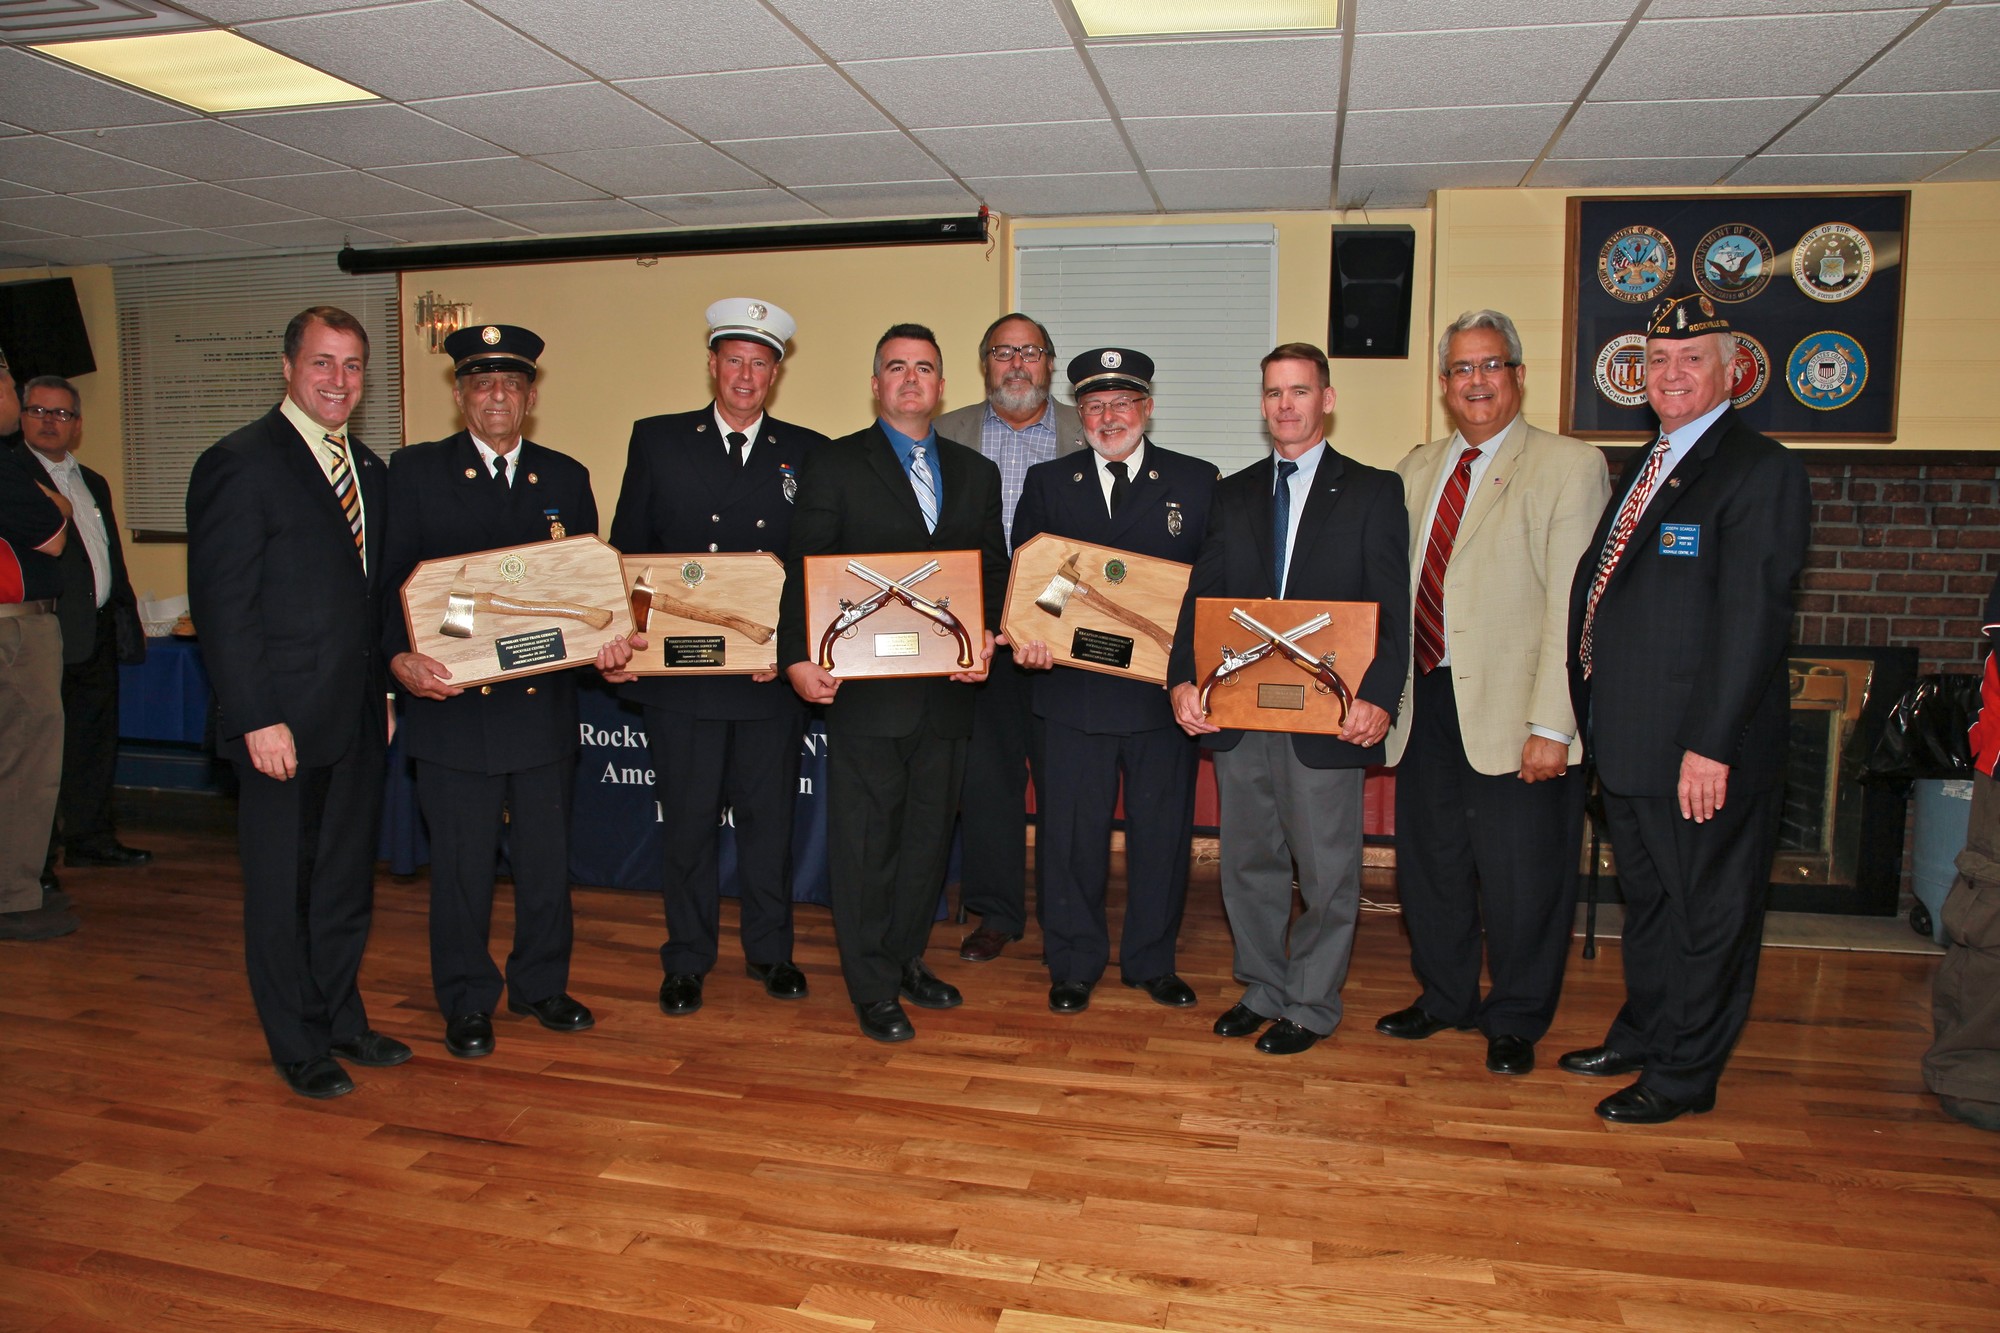 Last month, the American Legion honored Rockville Centre firefighters and police officers for their service to the village. Pictured here, from left, are Assemblyman Brian Curran, Honorary Chief Frank Germano, Fire Captain Thomas Walsh, Police Detective Timothy Seward, Rockville Centre Village Mayor Francis X. Murray, Ex-Captain James Prinzevalli, Police Detective Michael Meehan, Town of Hempstead Councilman Anthony Santino and Legion Post Commander Joe M. Scarola.